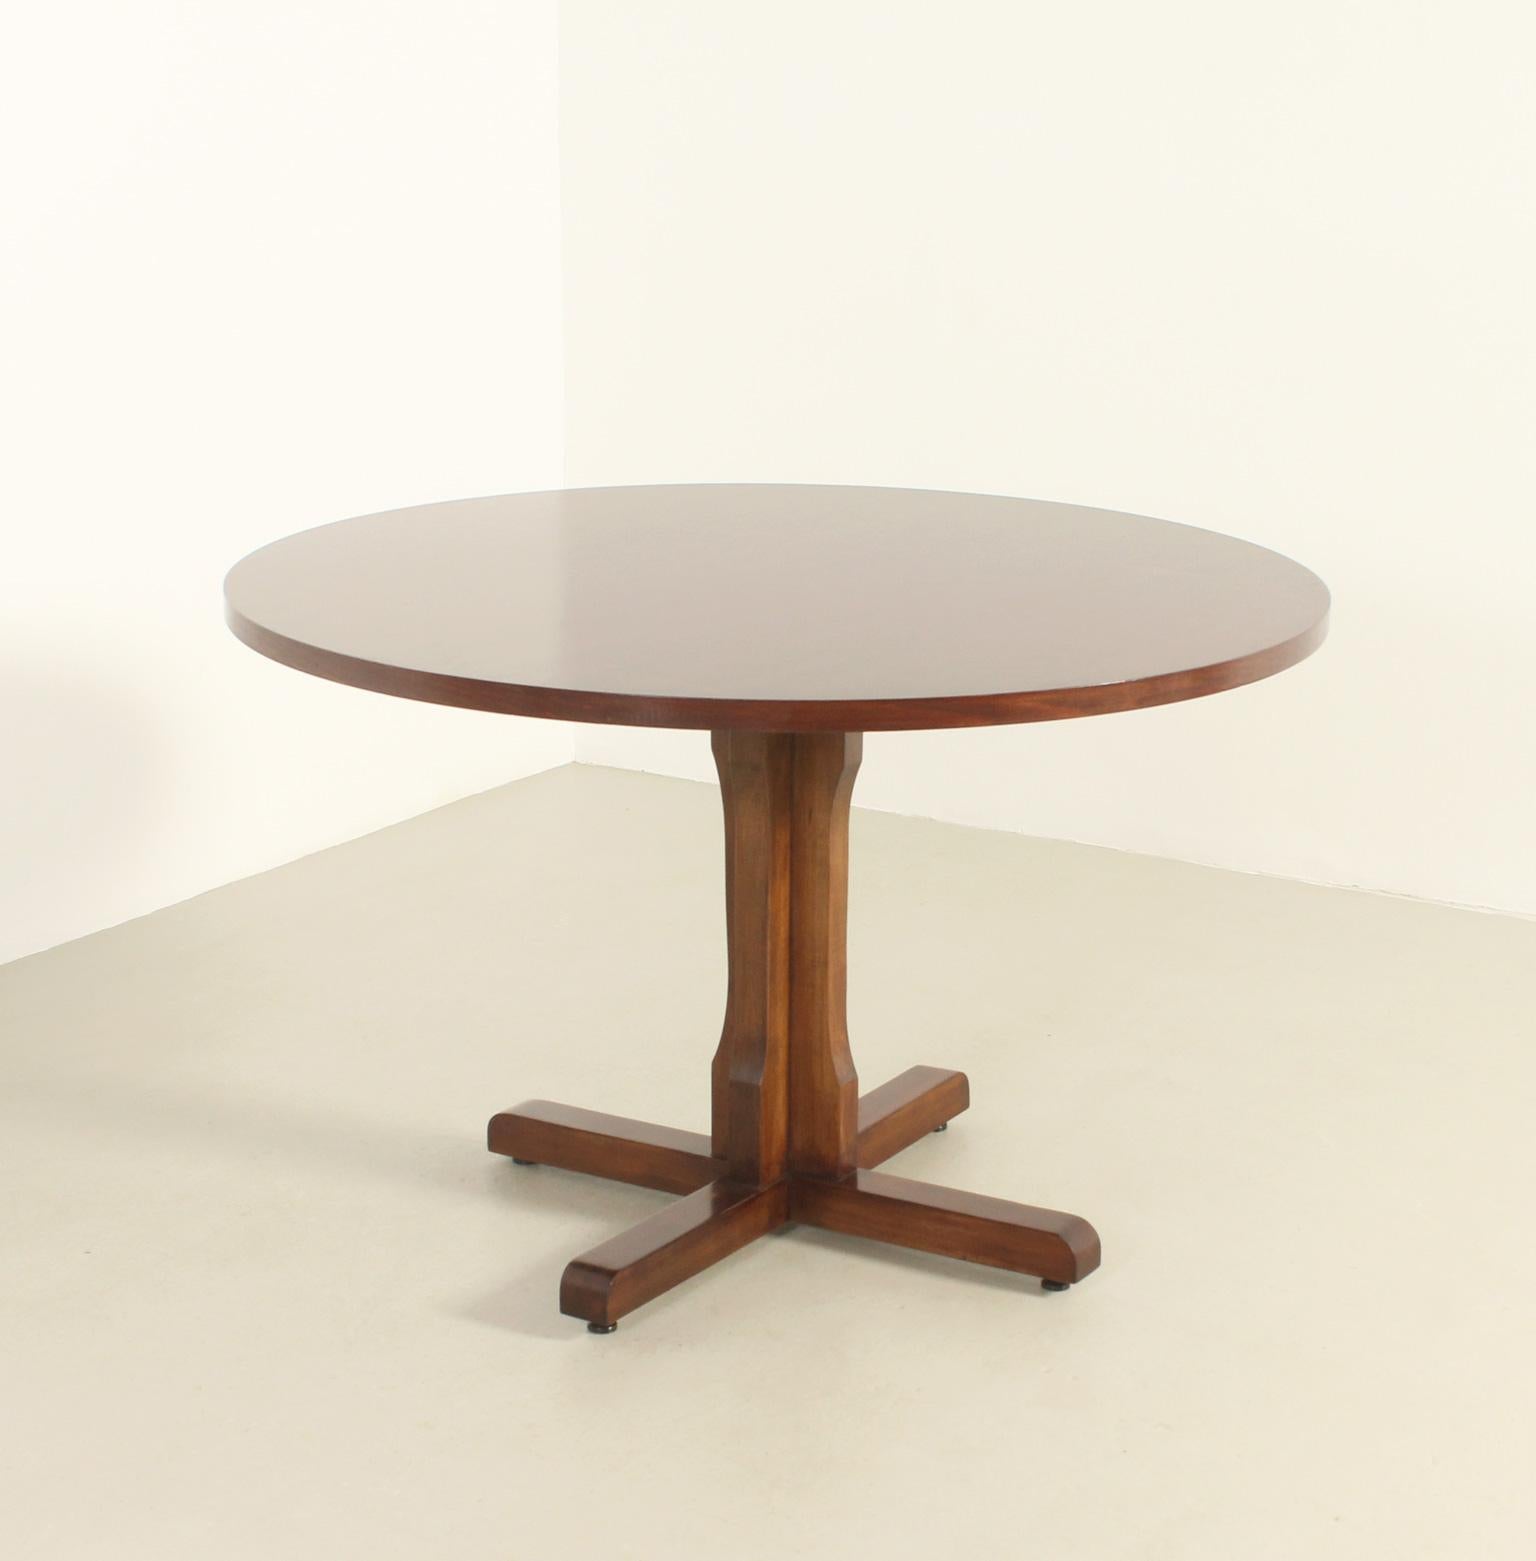 Mid-Century Modern Round Dining Table in Walnut Wood by Jordi Vilanova, Spain, 1960's For Sale